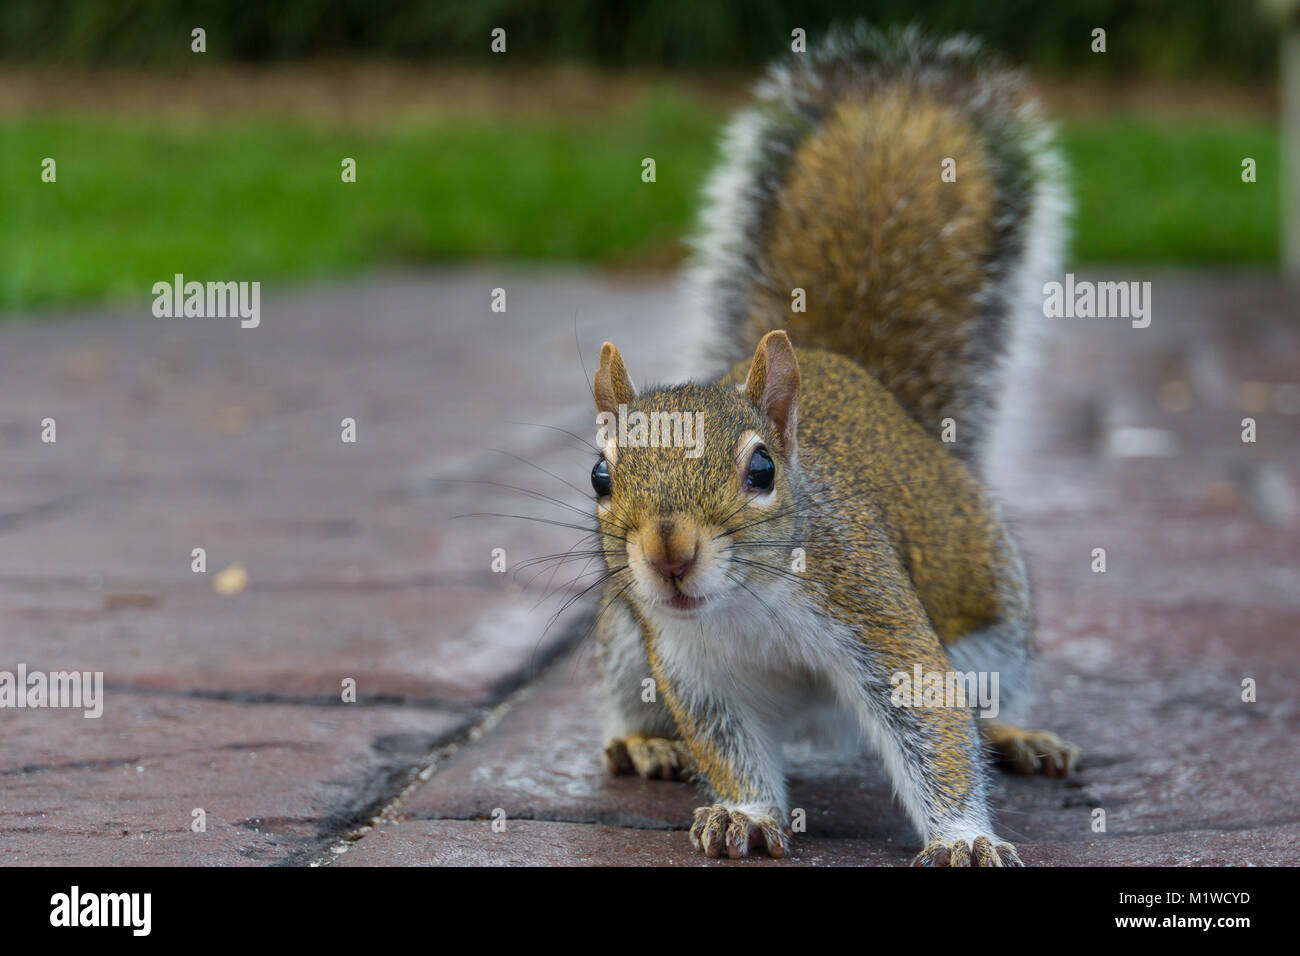 USA, Florida, Frontal view of a brown squirrel sitting on the ground with upright tail and bushy fur Stock Photo